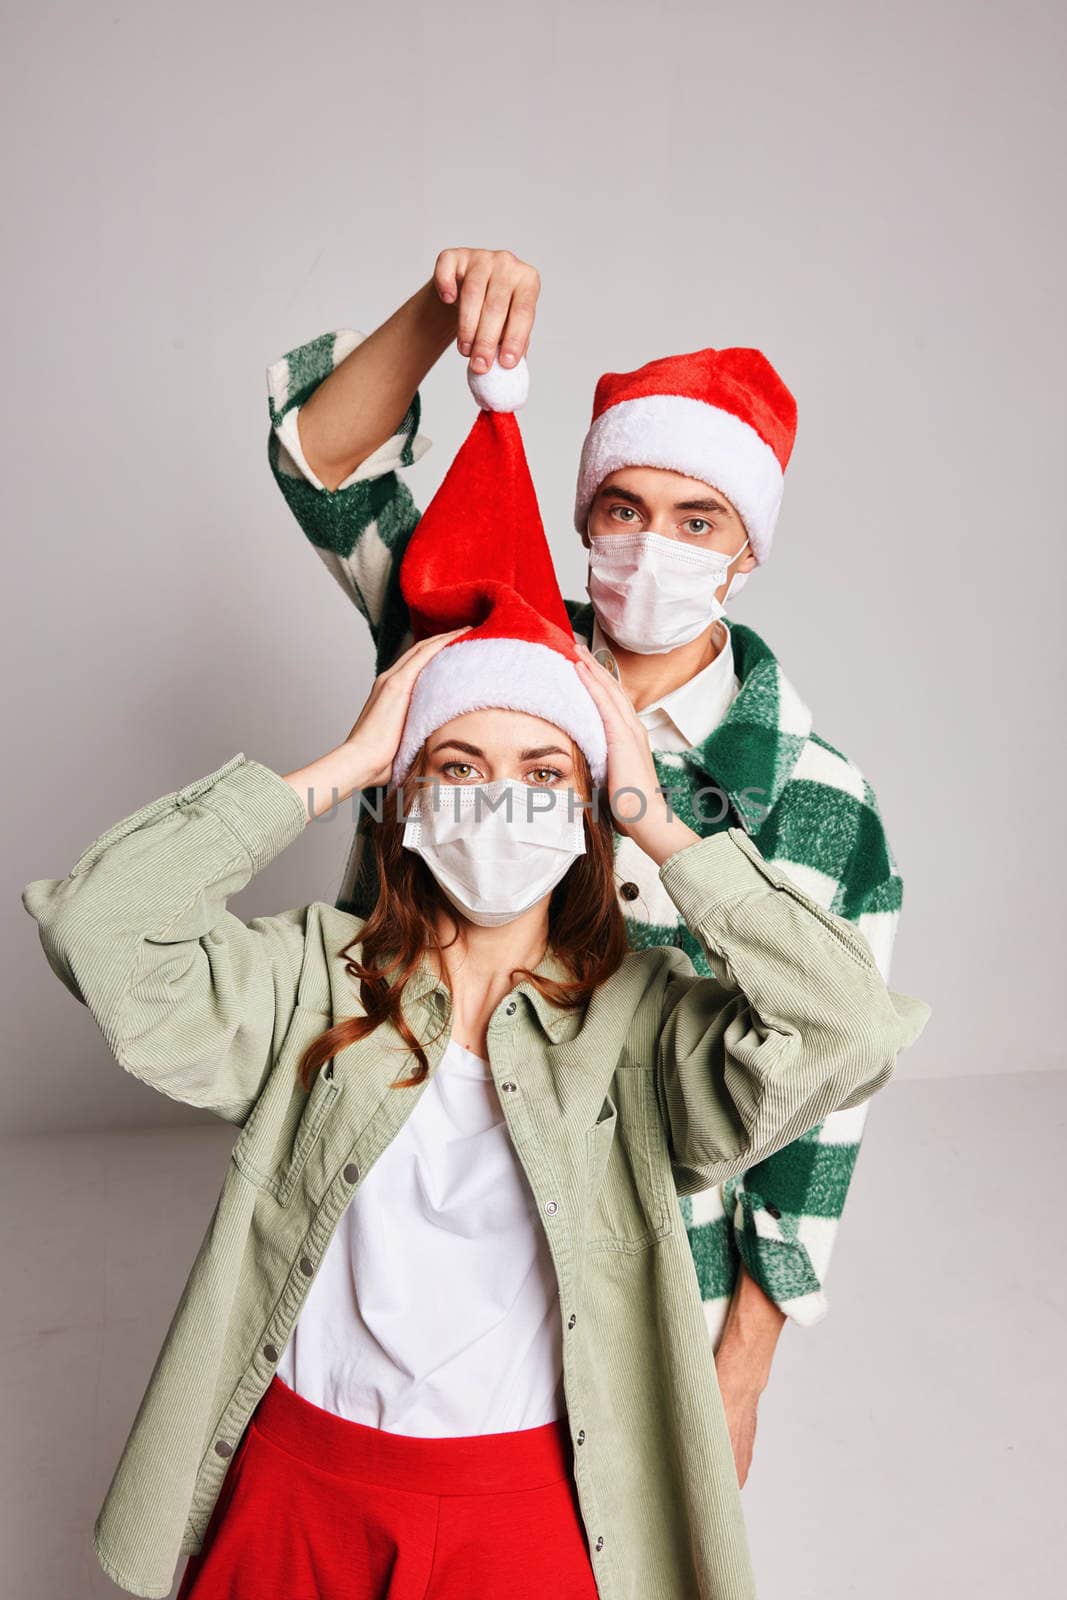 Married couple Christmas fun holiday medical masks by SHOTPRIME